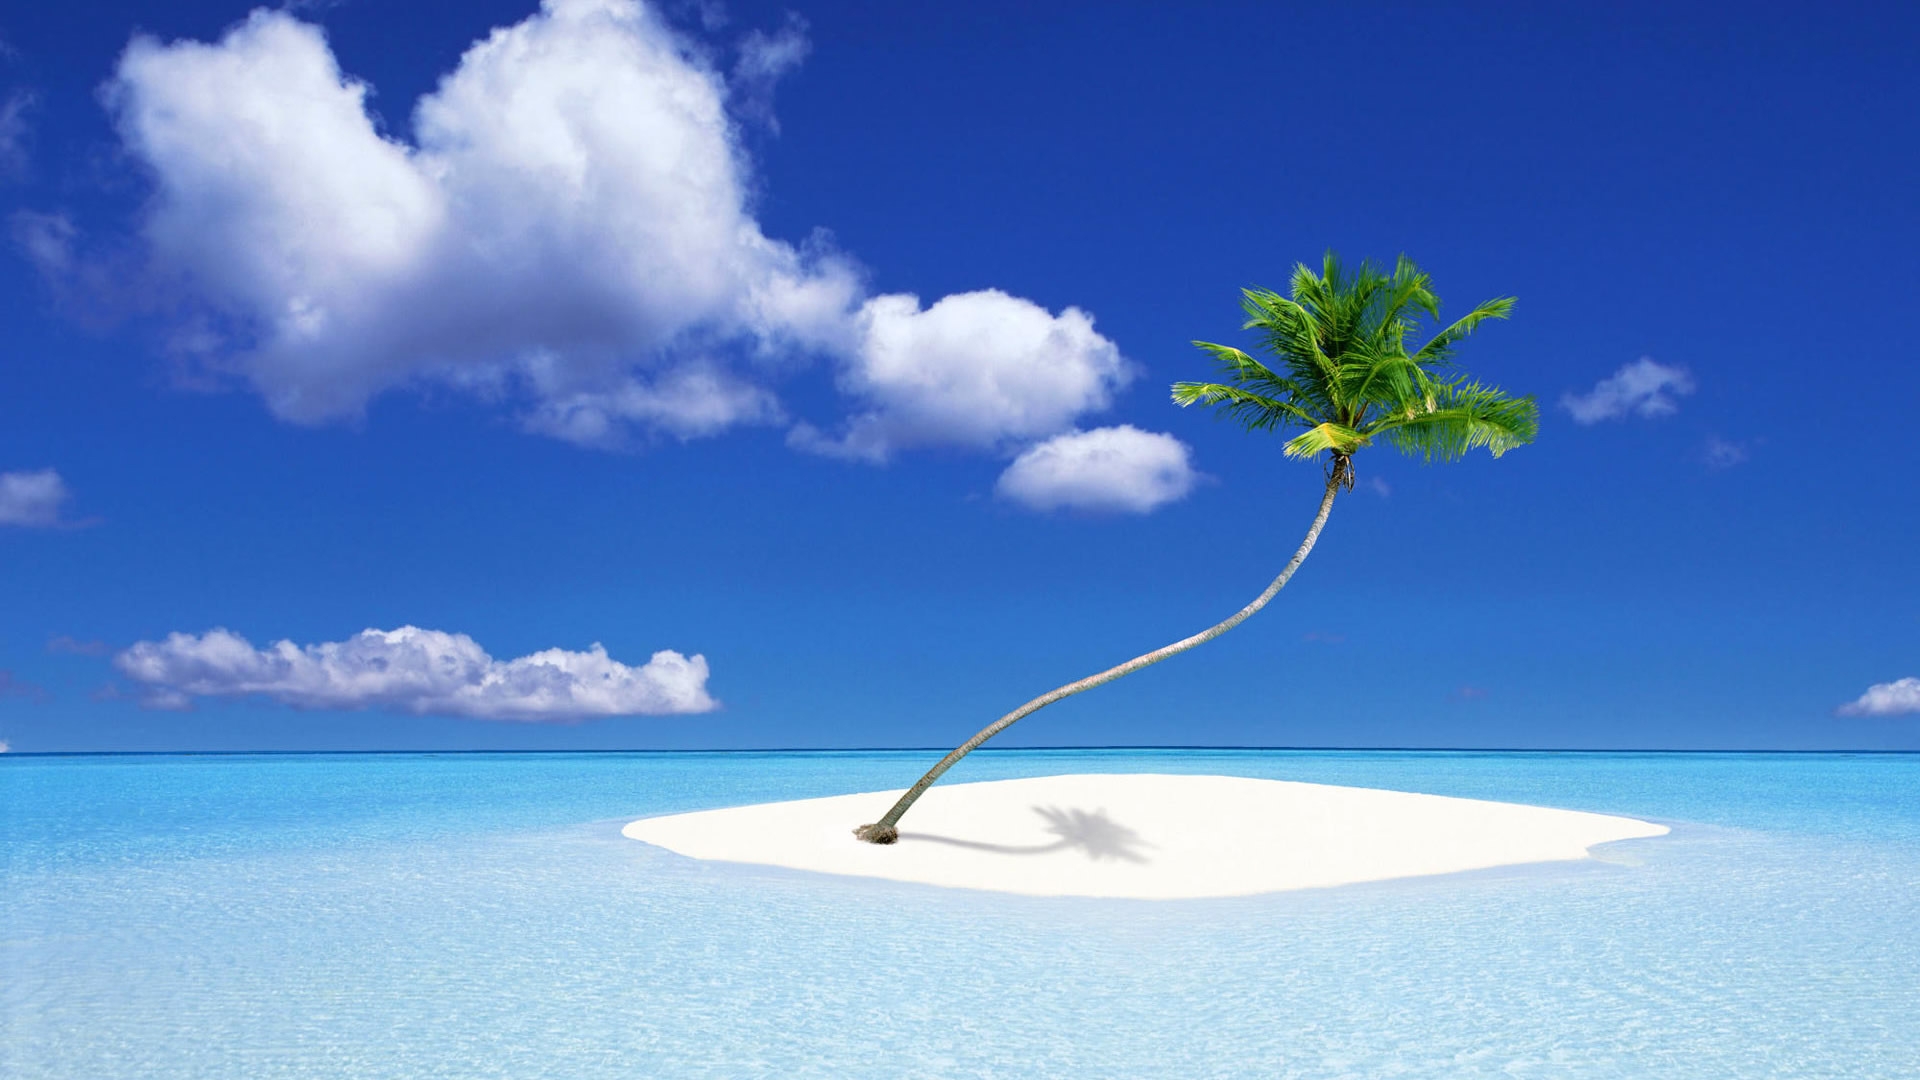 A Palm Tree Island for 1920 x 1080 HDTV 1080p resolution